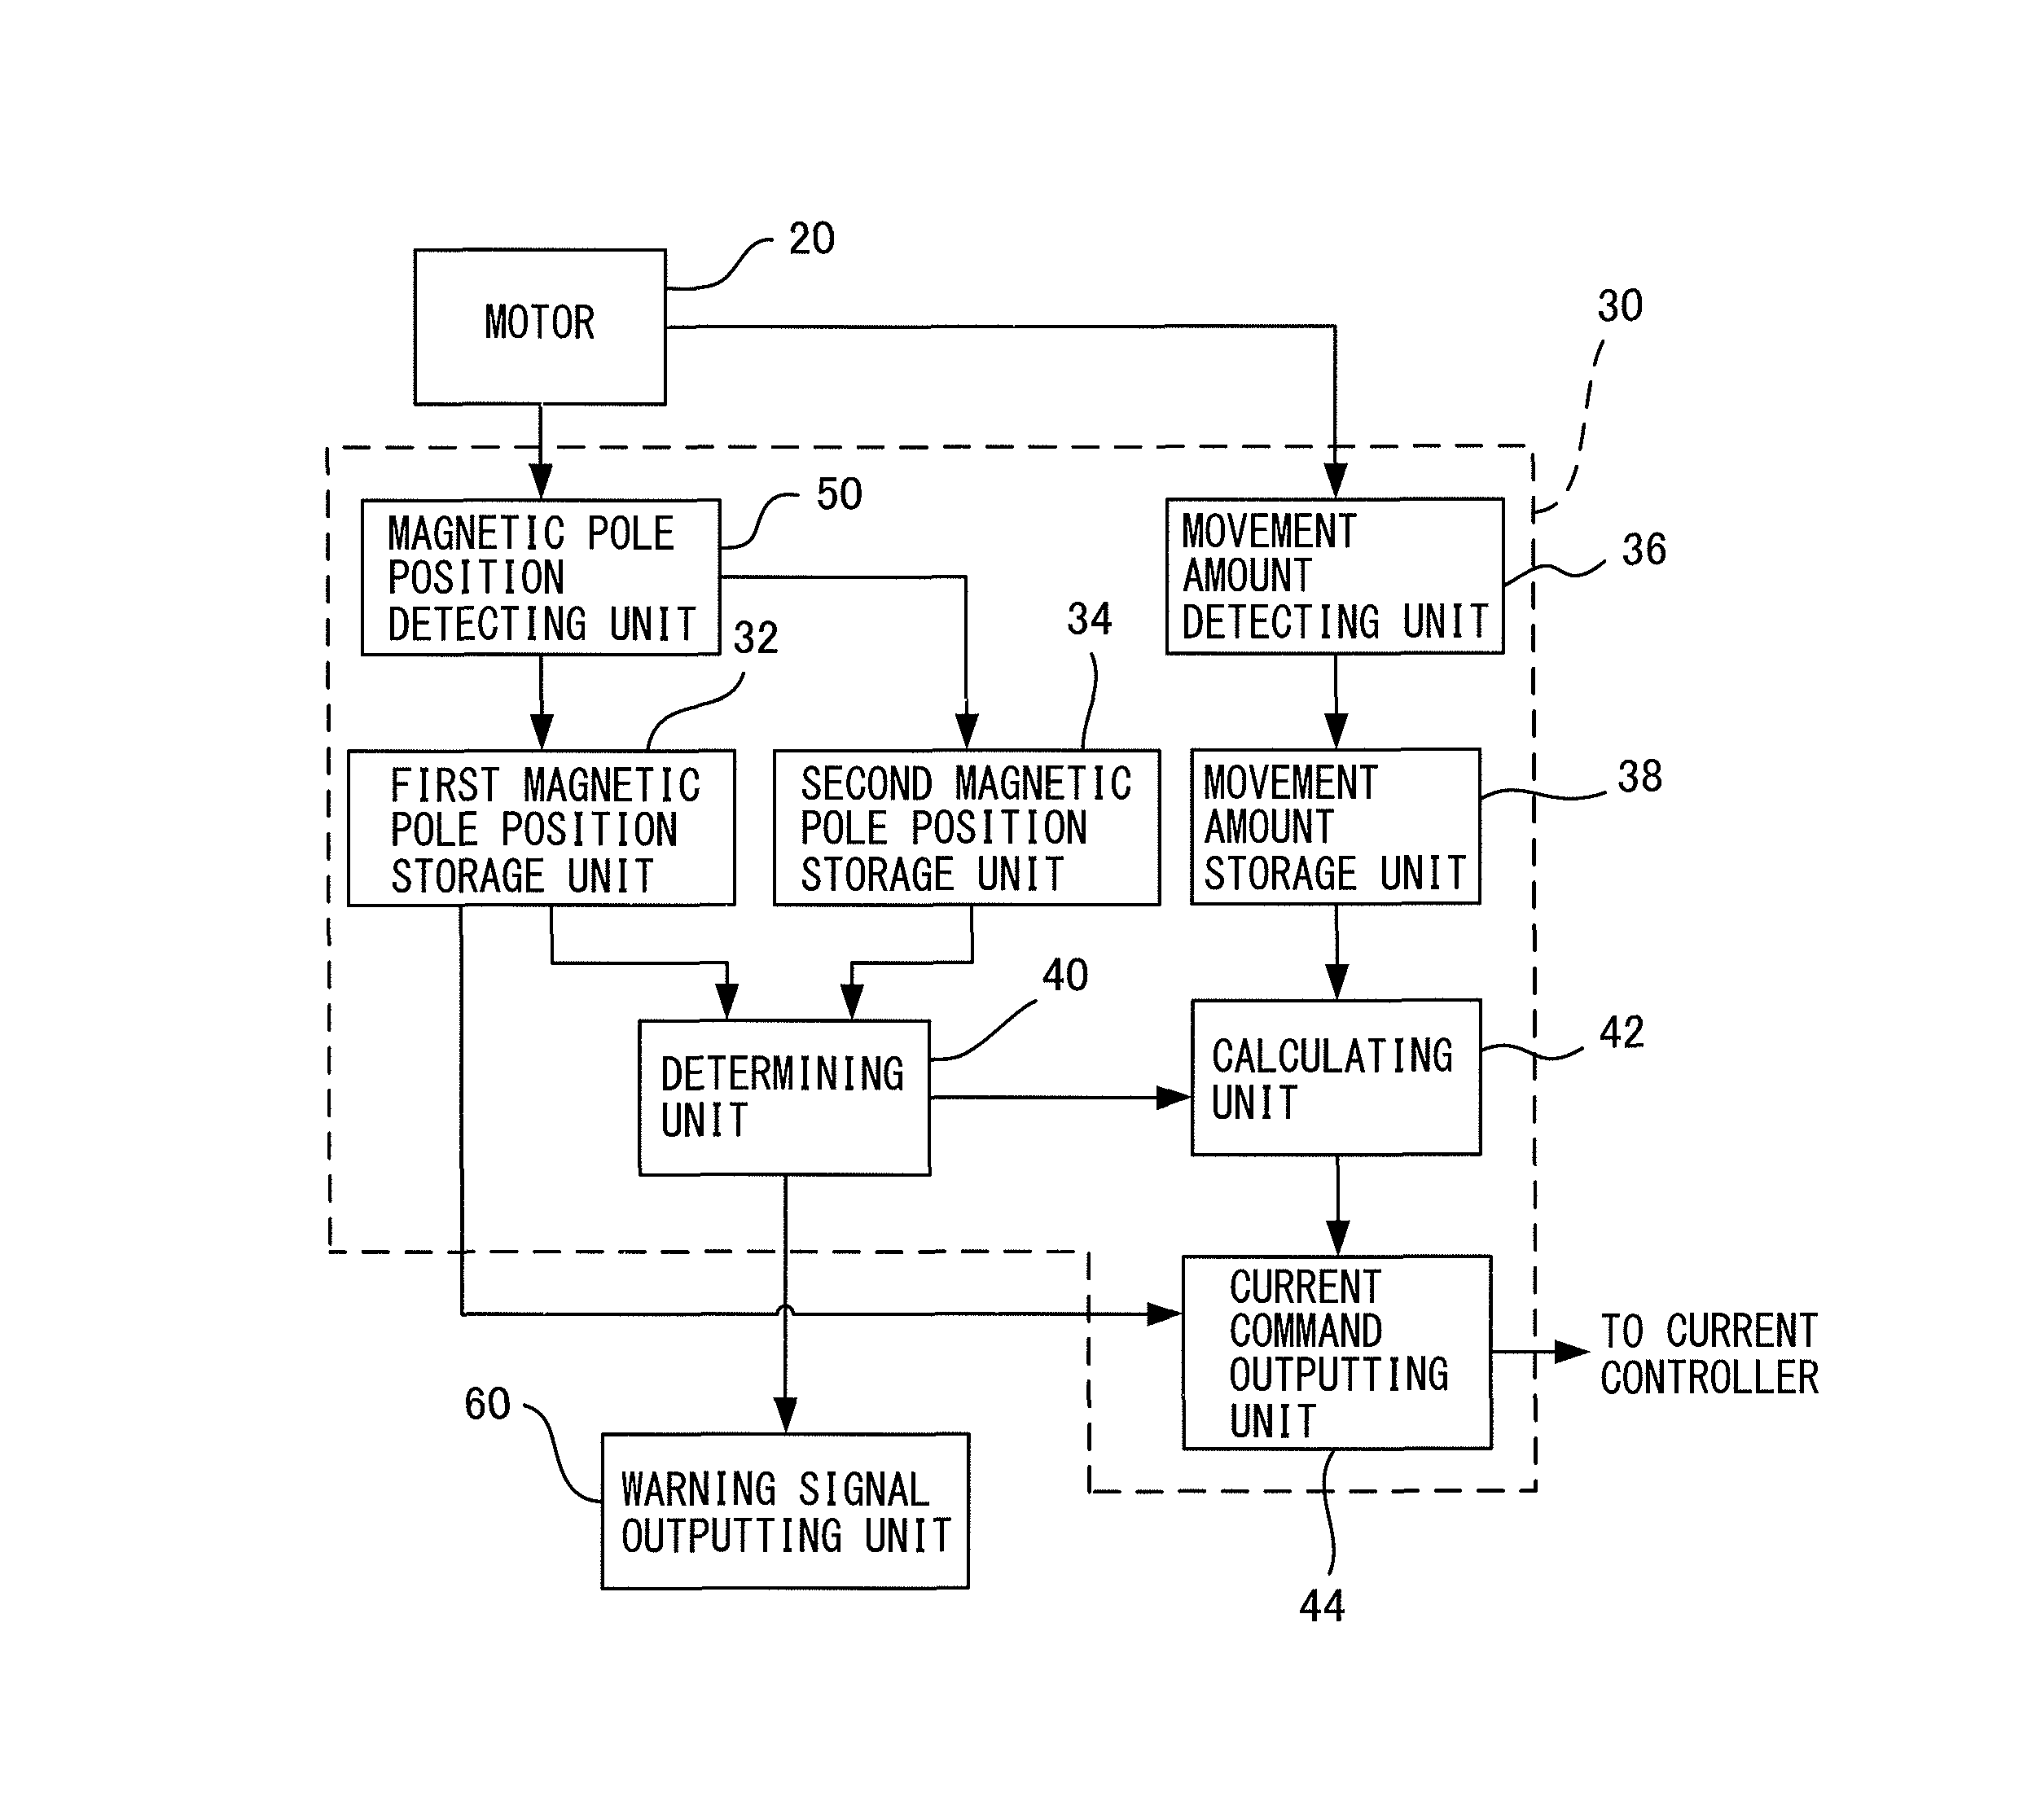 Magnetic pole position detecting device for detecting magnetic pole position of rotor in permanent-magnet synchronous motor